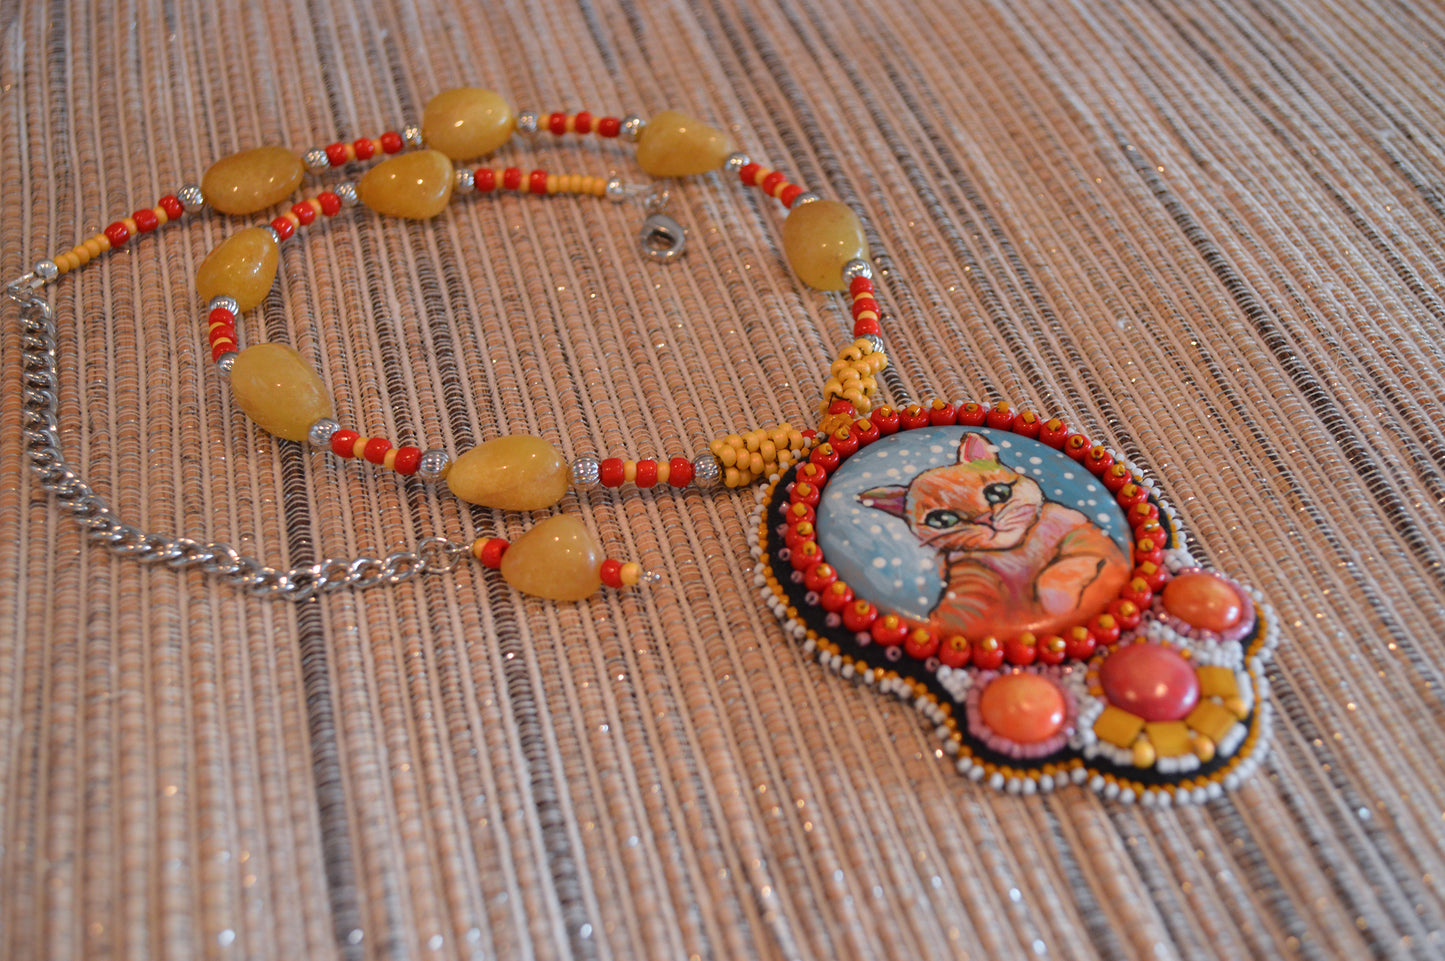 Ginger Tabby Cat Pendant / Orange cat necklace jewelry / Hand painted art piece animal painting bead embroidery